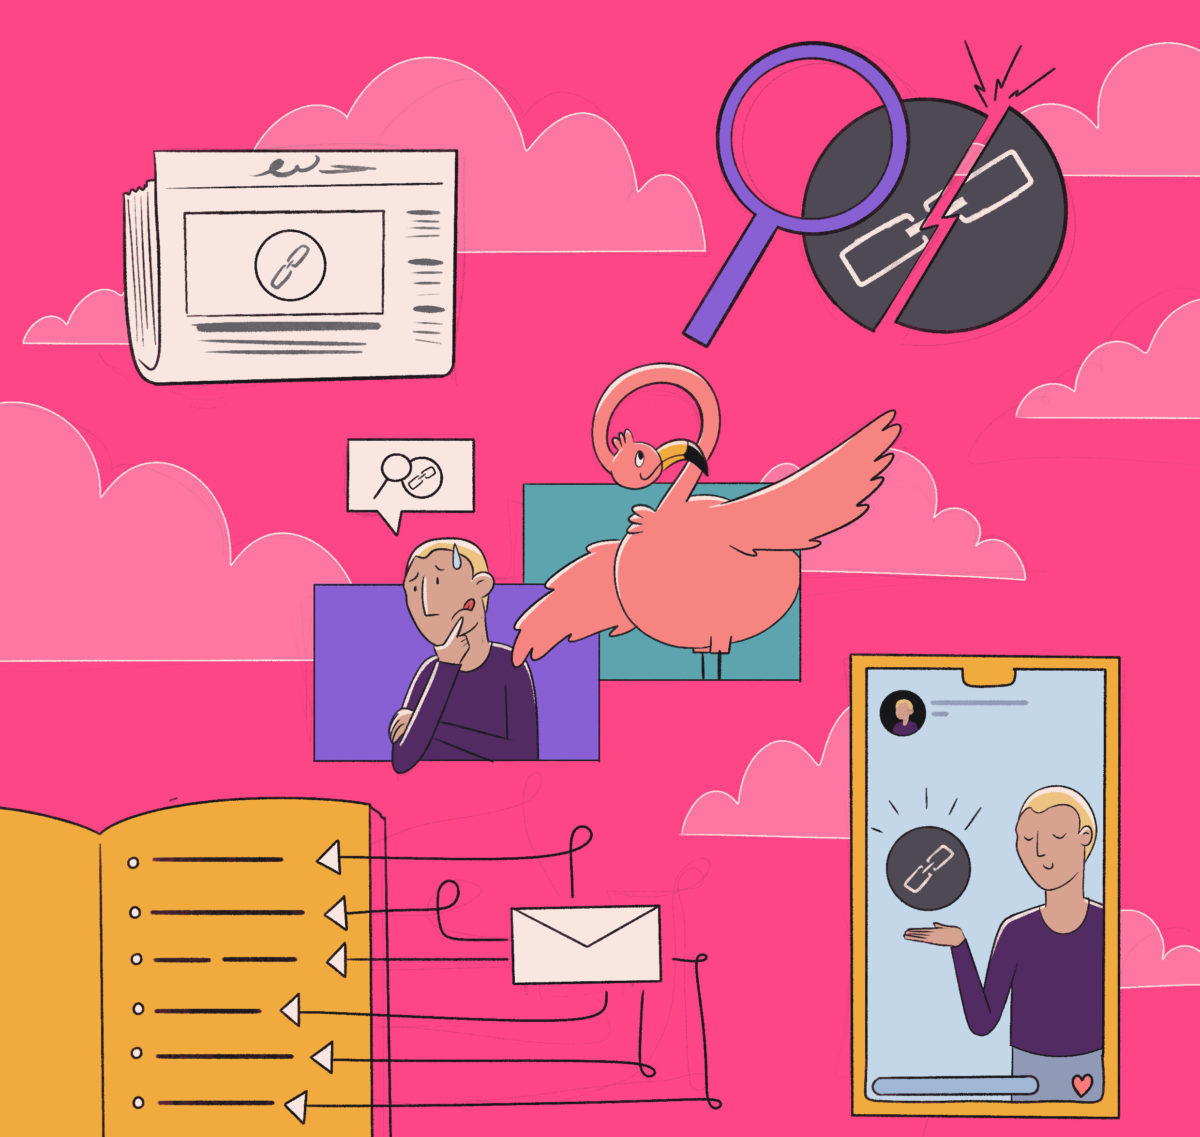 Illustration of various communication and information symbols, including a newspaper, magnifying glass, scissor cutting a cord, a person thinking, a bird delivering a message, an envelope, and a smartphone displaying a person speaking.